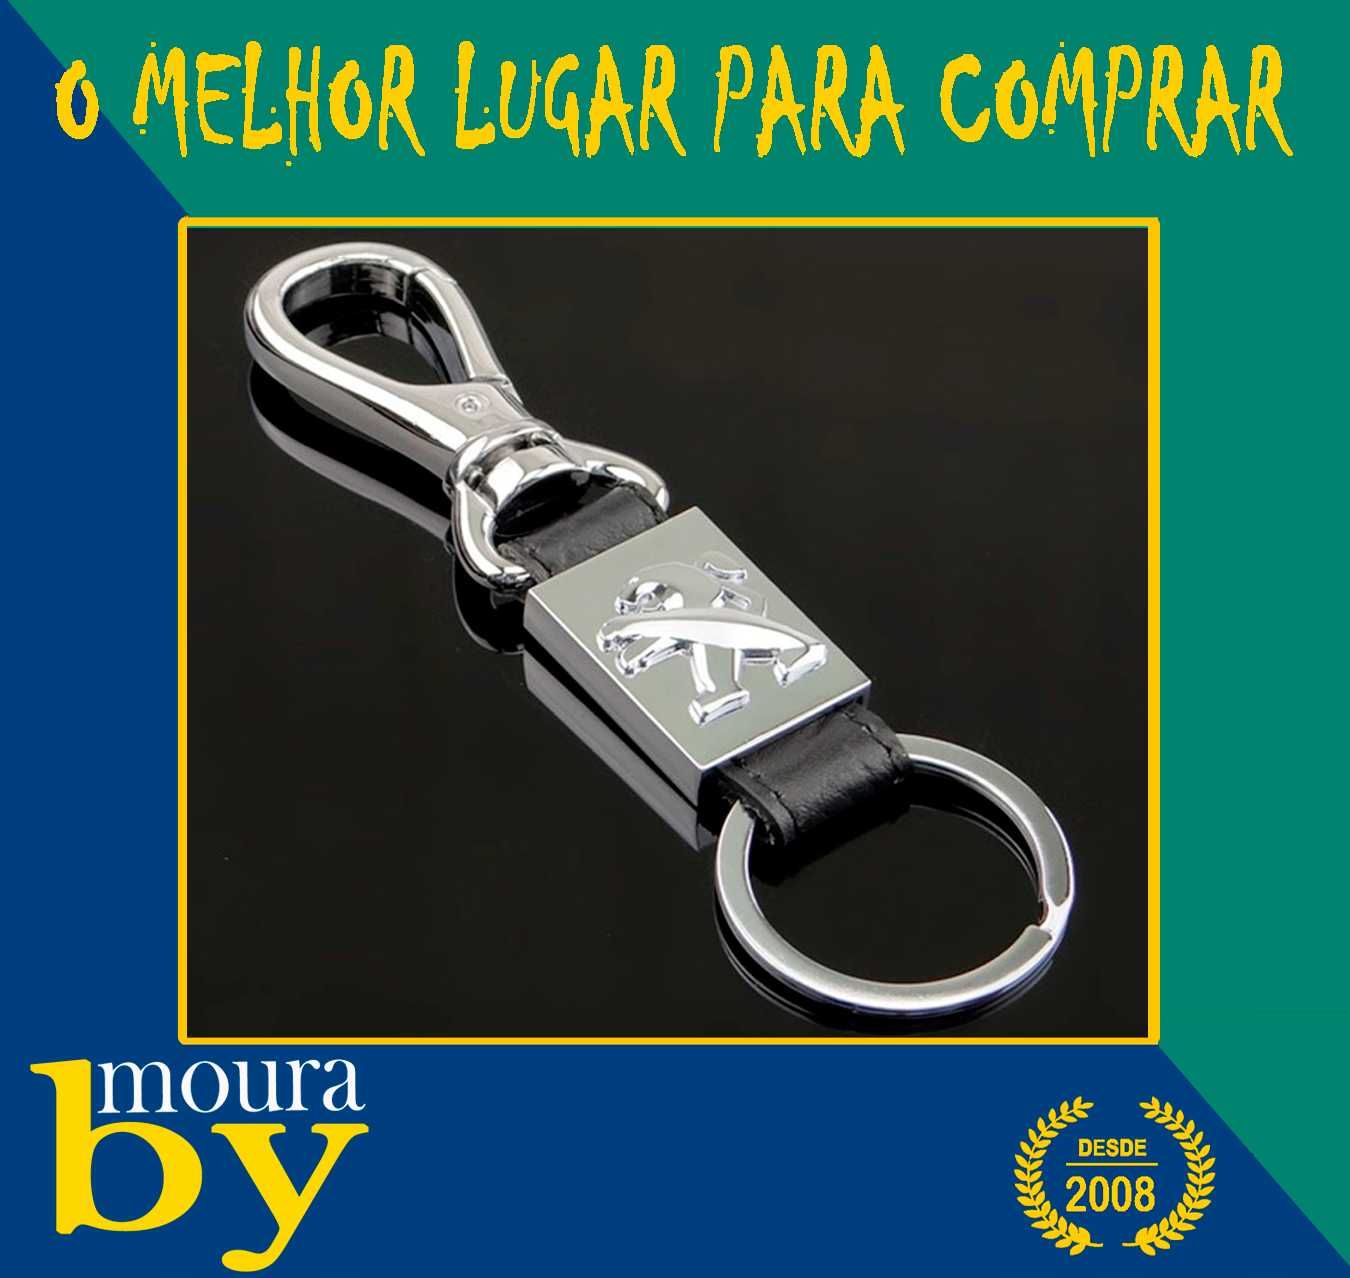 Porta Chaves Peugeot metálico e cabedal personalizados